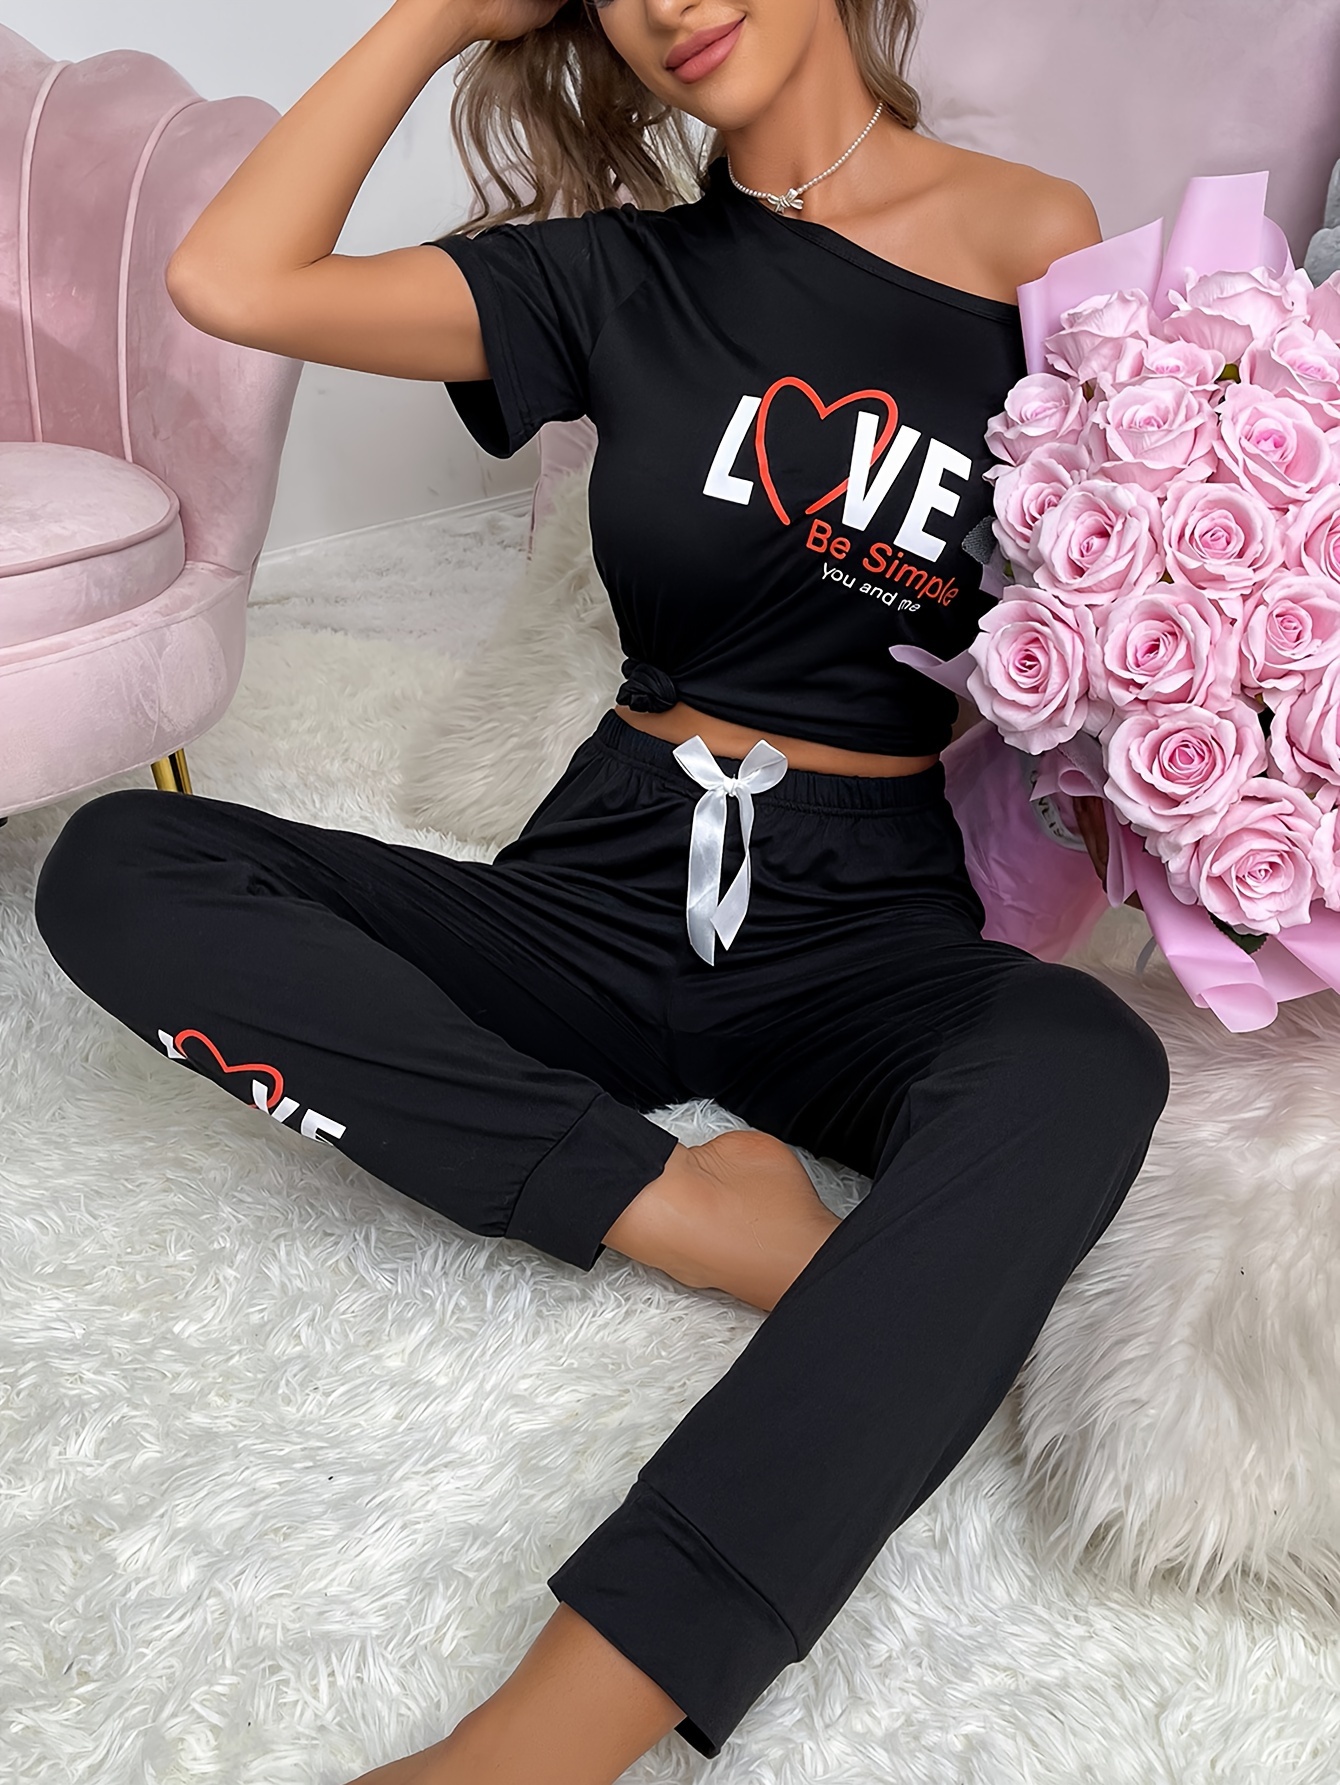 Women Pajama Shorts Comfy Lounge Side Split Ruched Elastic Low Waist Sleep  Shorts Stretchy Cute Mini Pj Bottoms (Black, S) at  Women's Clothing  store